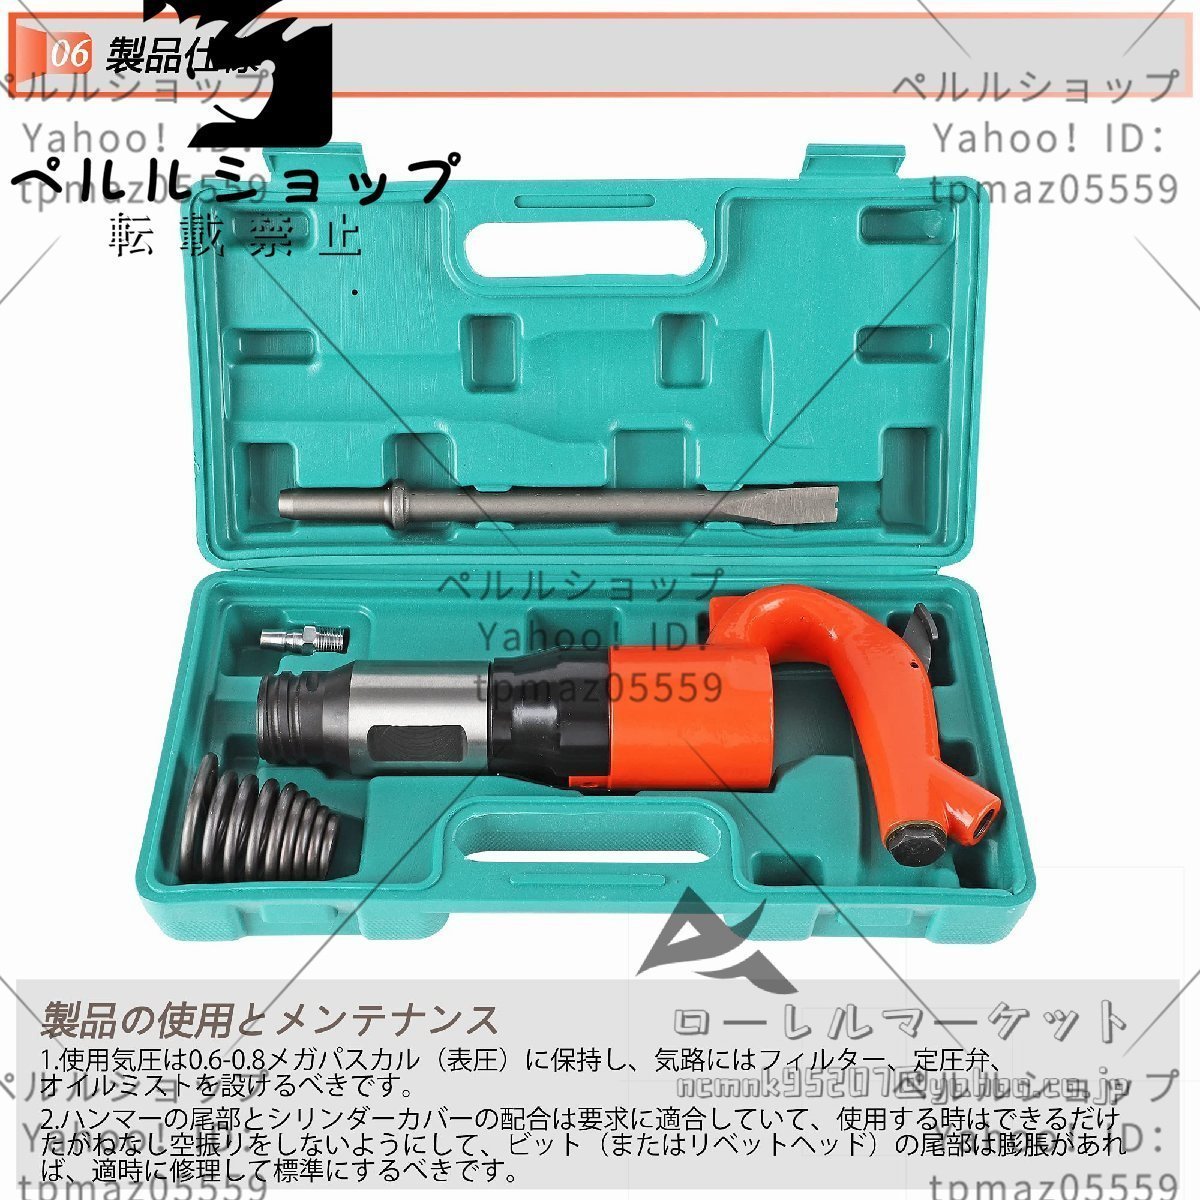  air hammer empty atmospheric pressure Hammer Point chizeru/ Flat chizeru concrete morutaru stone material chipping work wear resistance exclusive use case attaching 